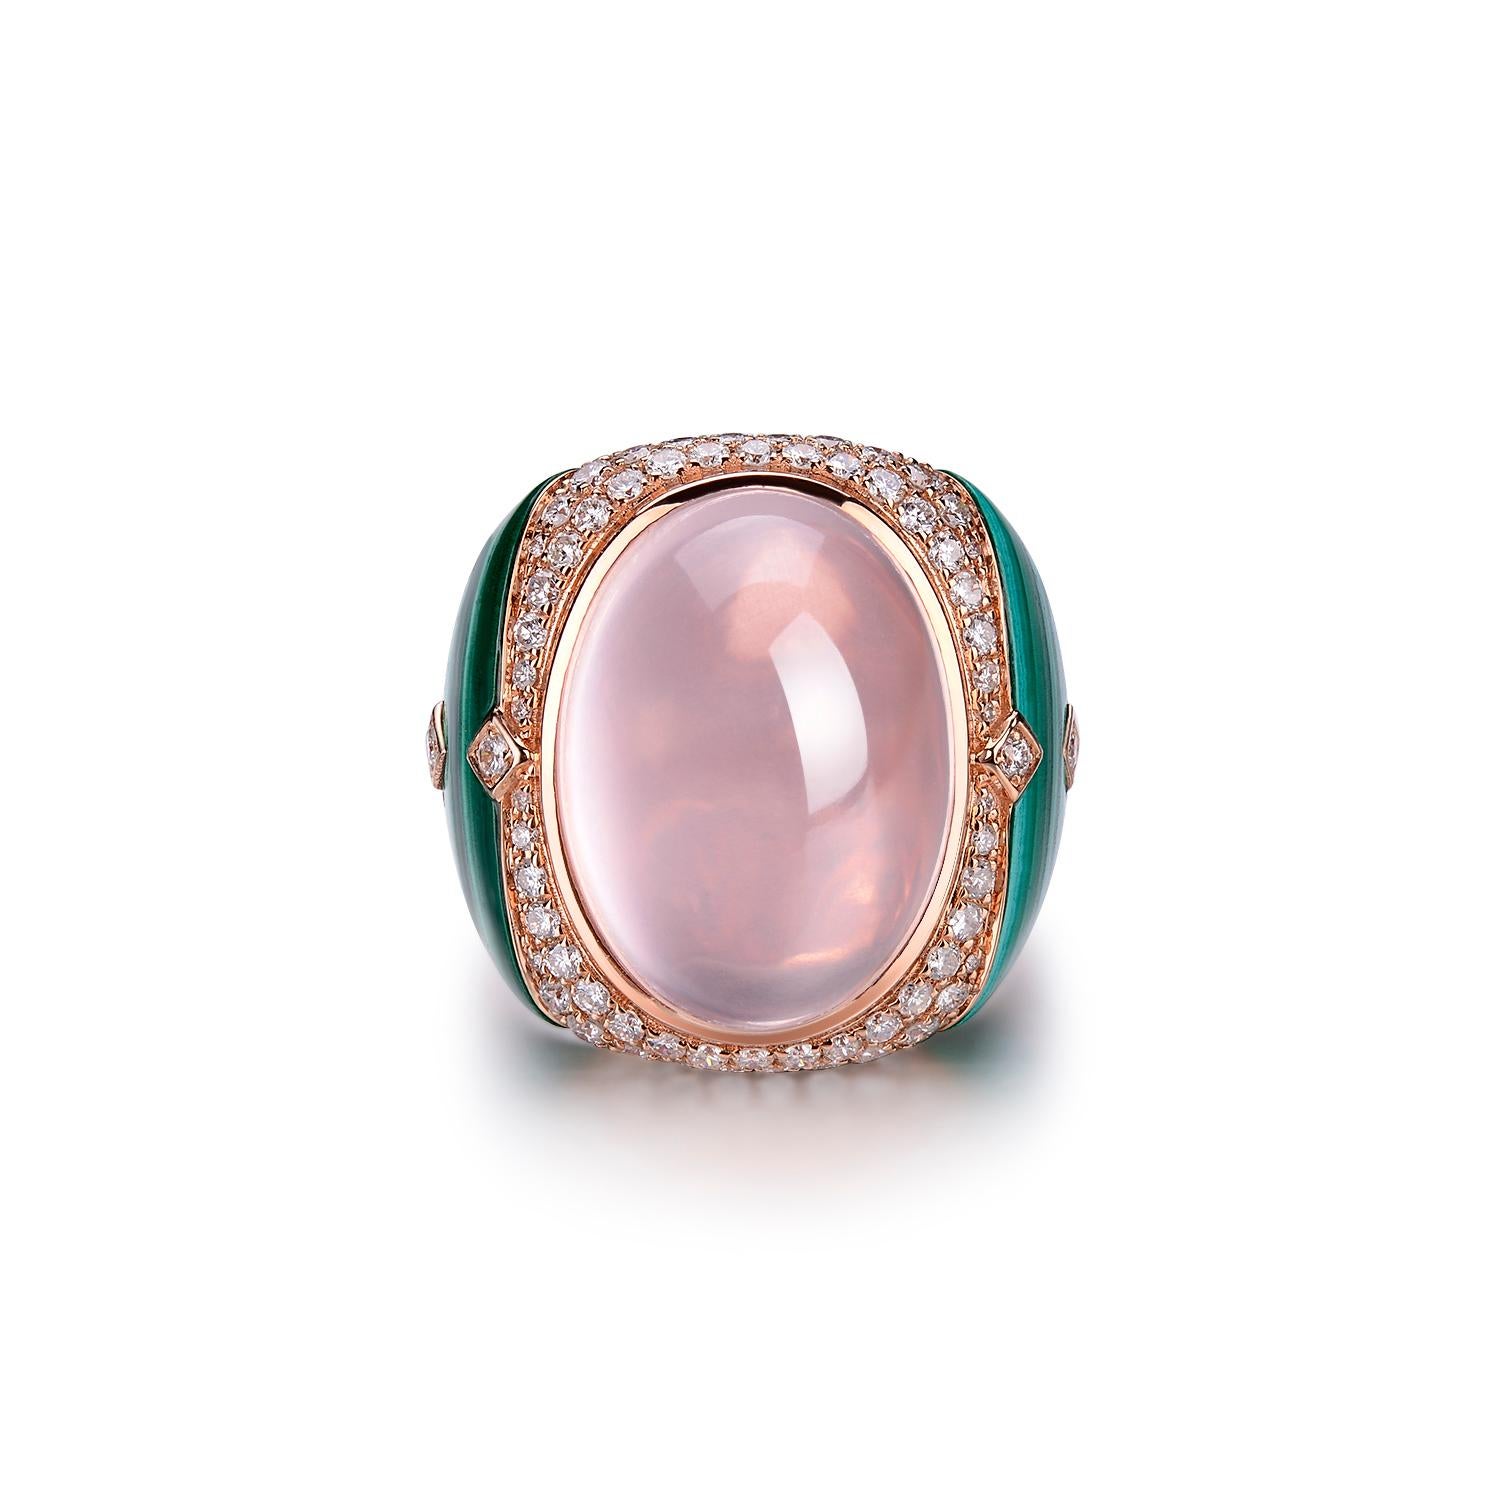 This ring features 20.45 carats of rose quartz in the center. Rose quartz set in bezel setting assented with double diamond halo. Malachite are handcrafted by our craftsman that fit perfectly into the gold mounting. 
Matching earrings are available,